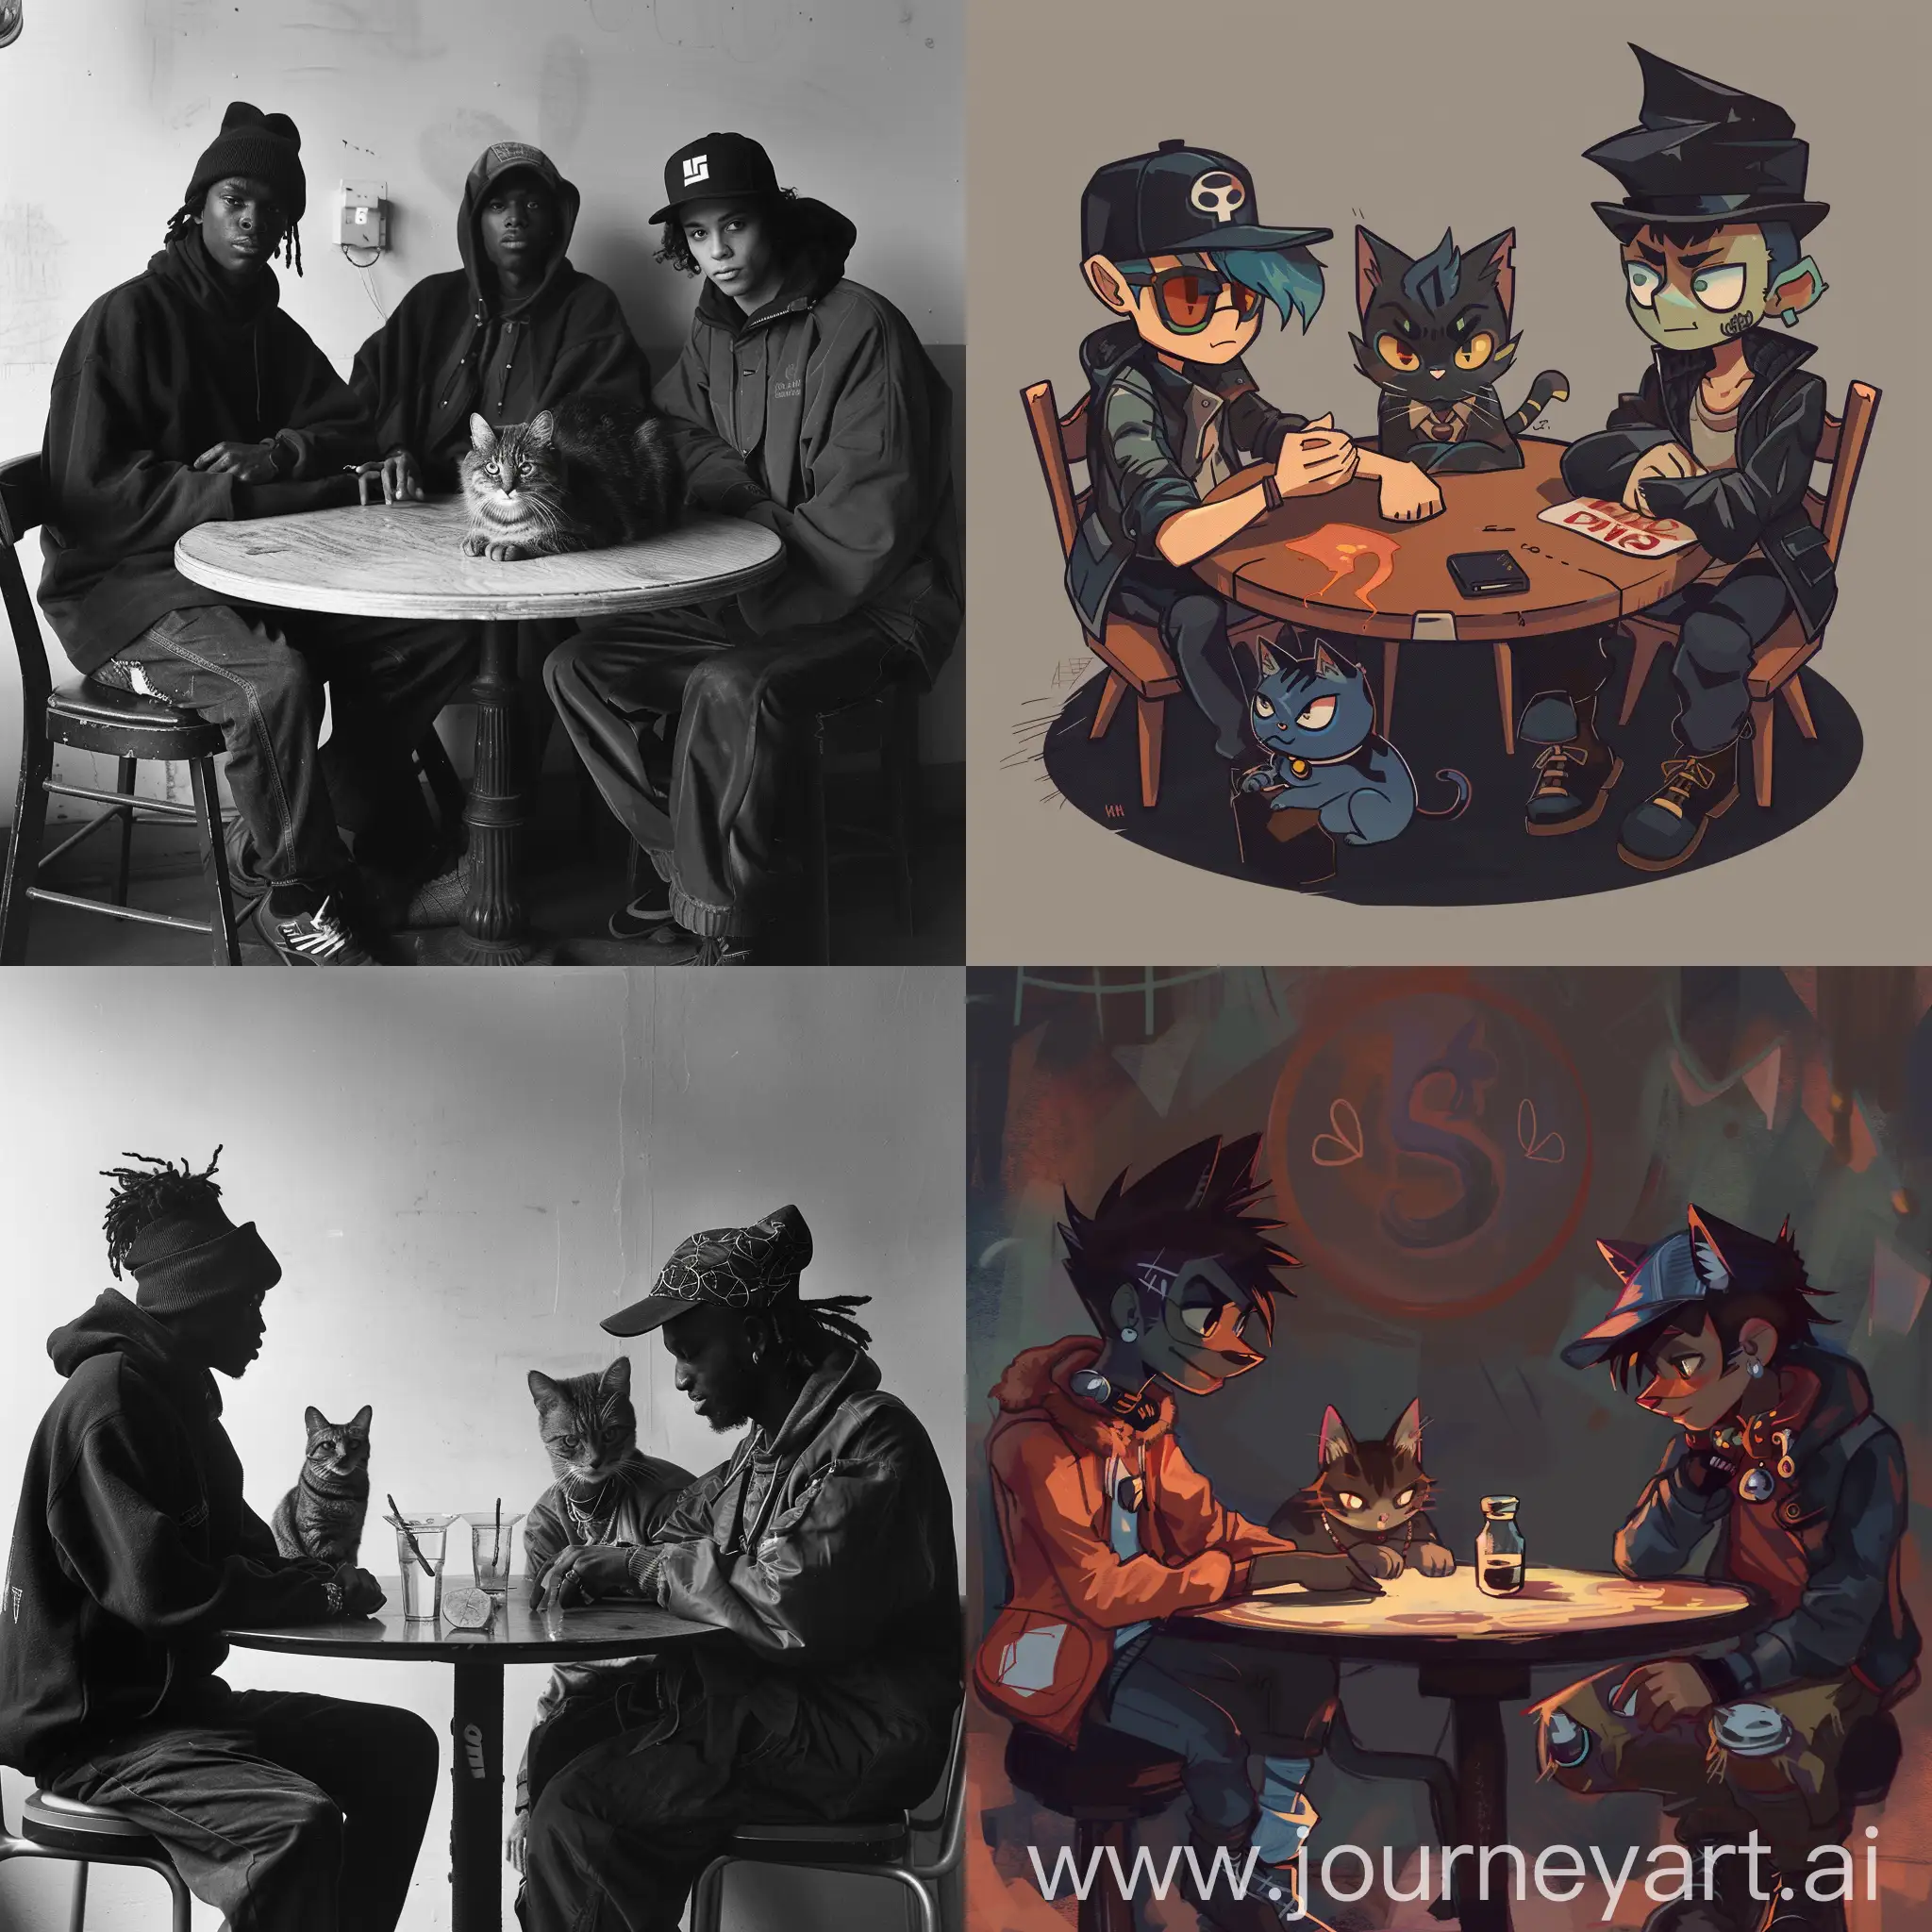 Token S, Young Hustler and Cat sit around the circle table